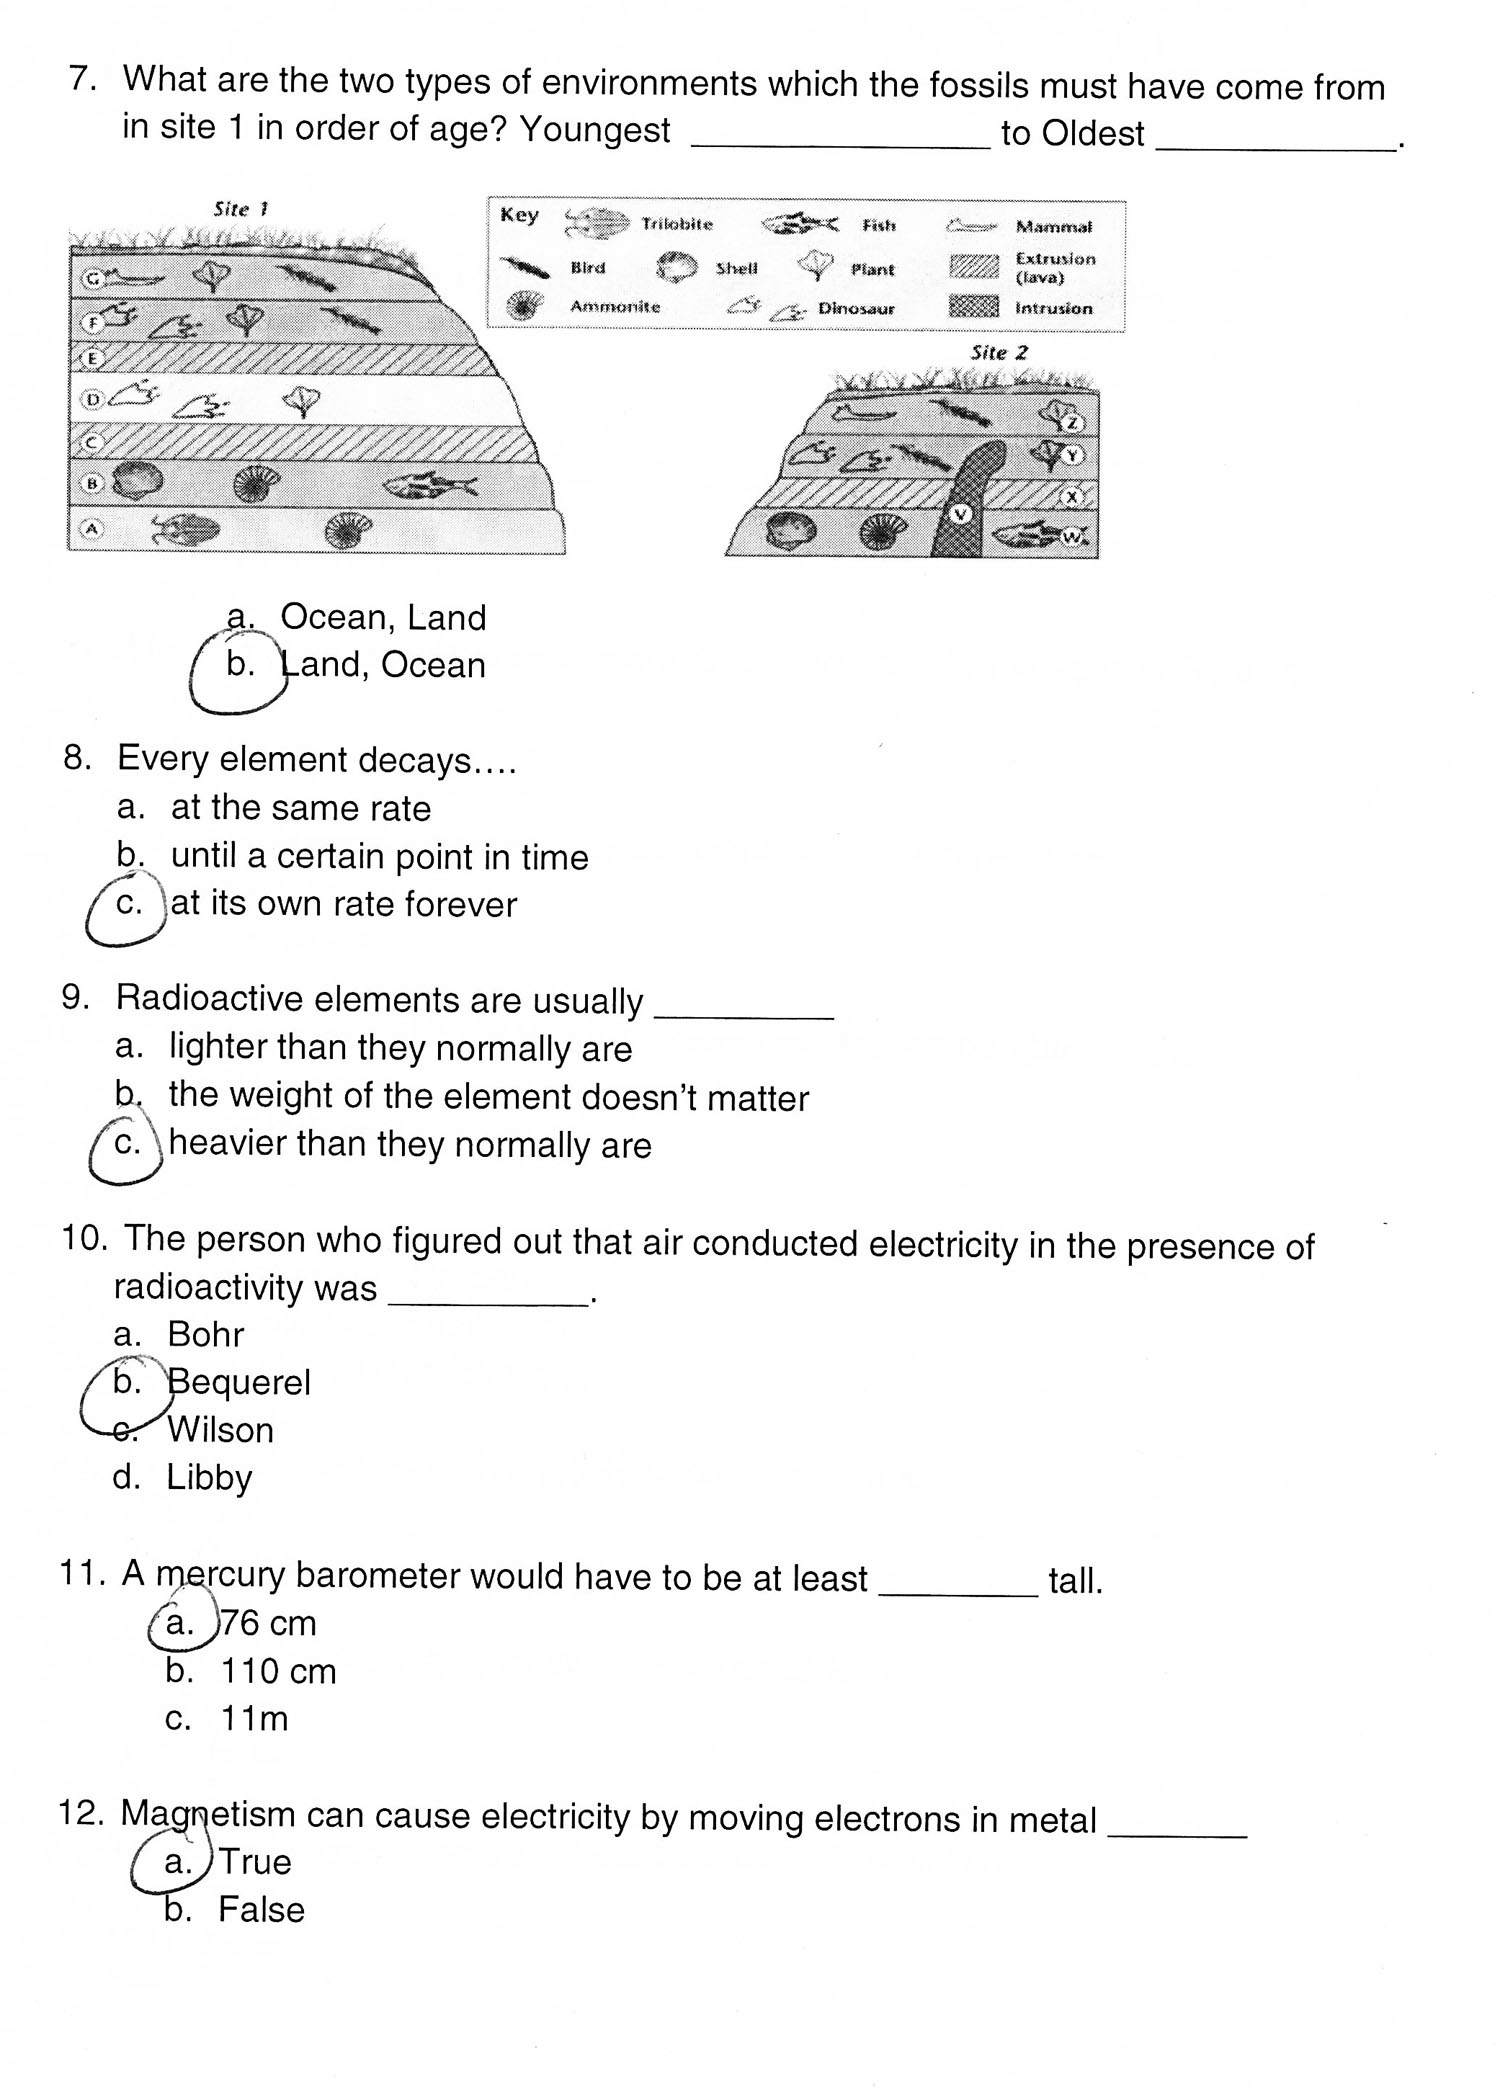 2009: 4th Quarter Assignments 8th Grade Earth Science – Crowderious Maximus